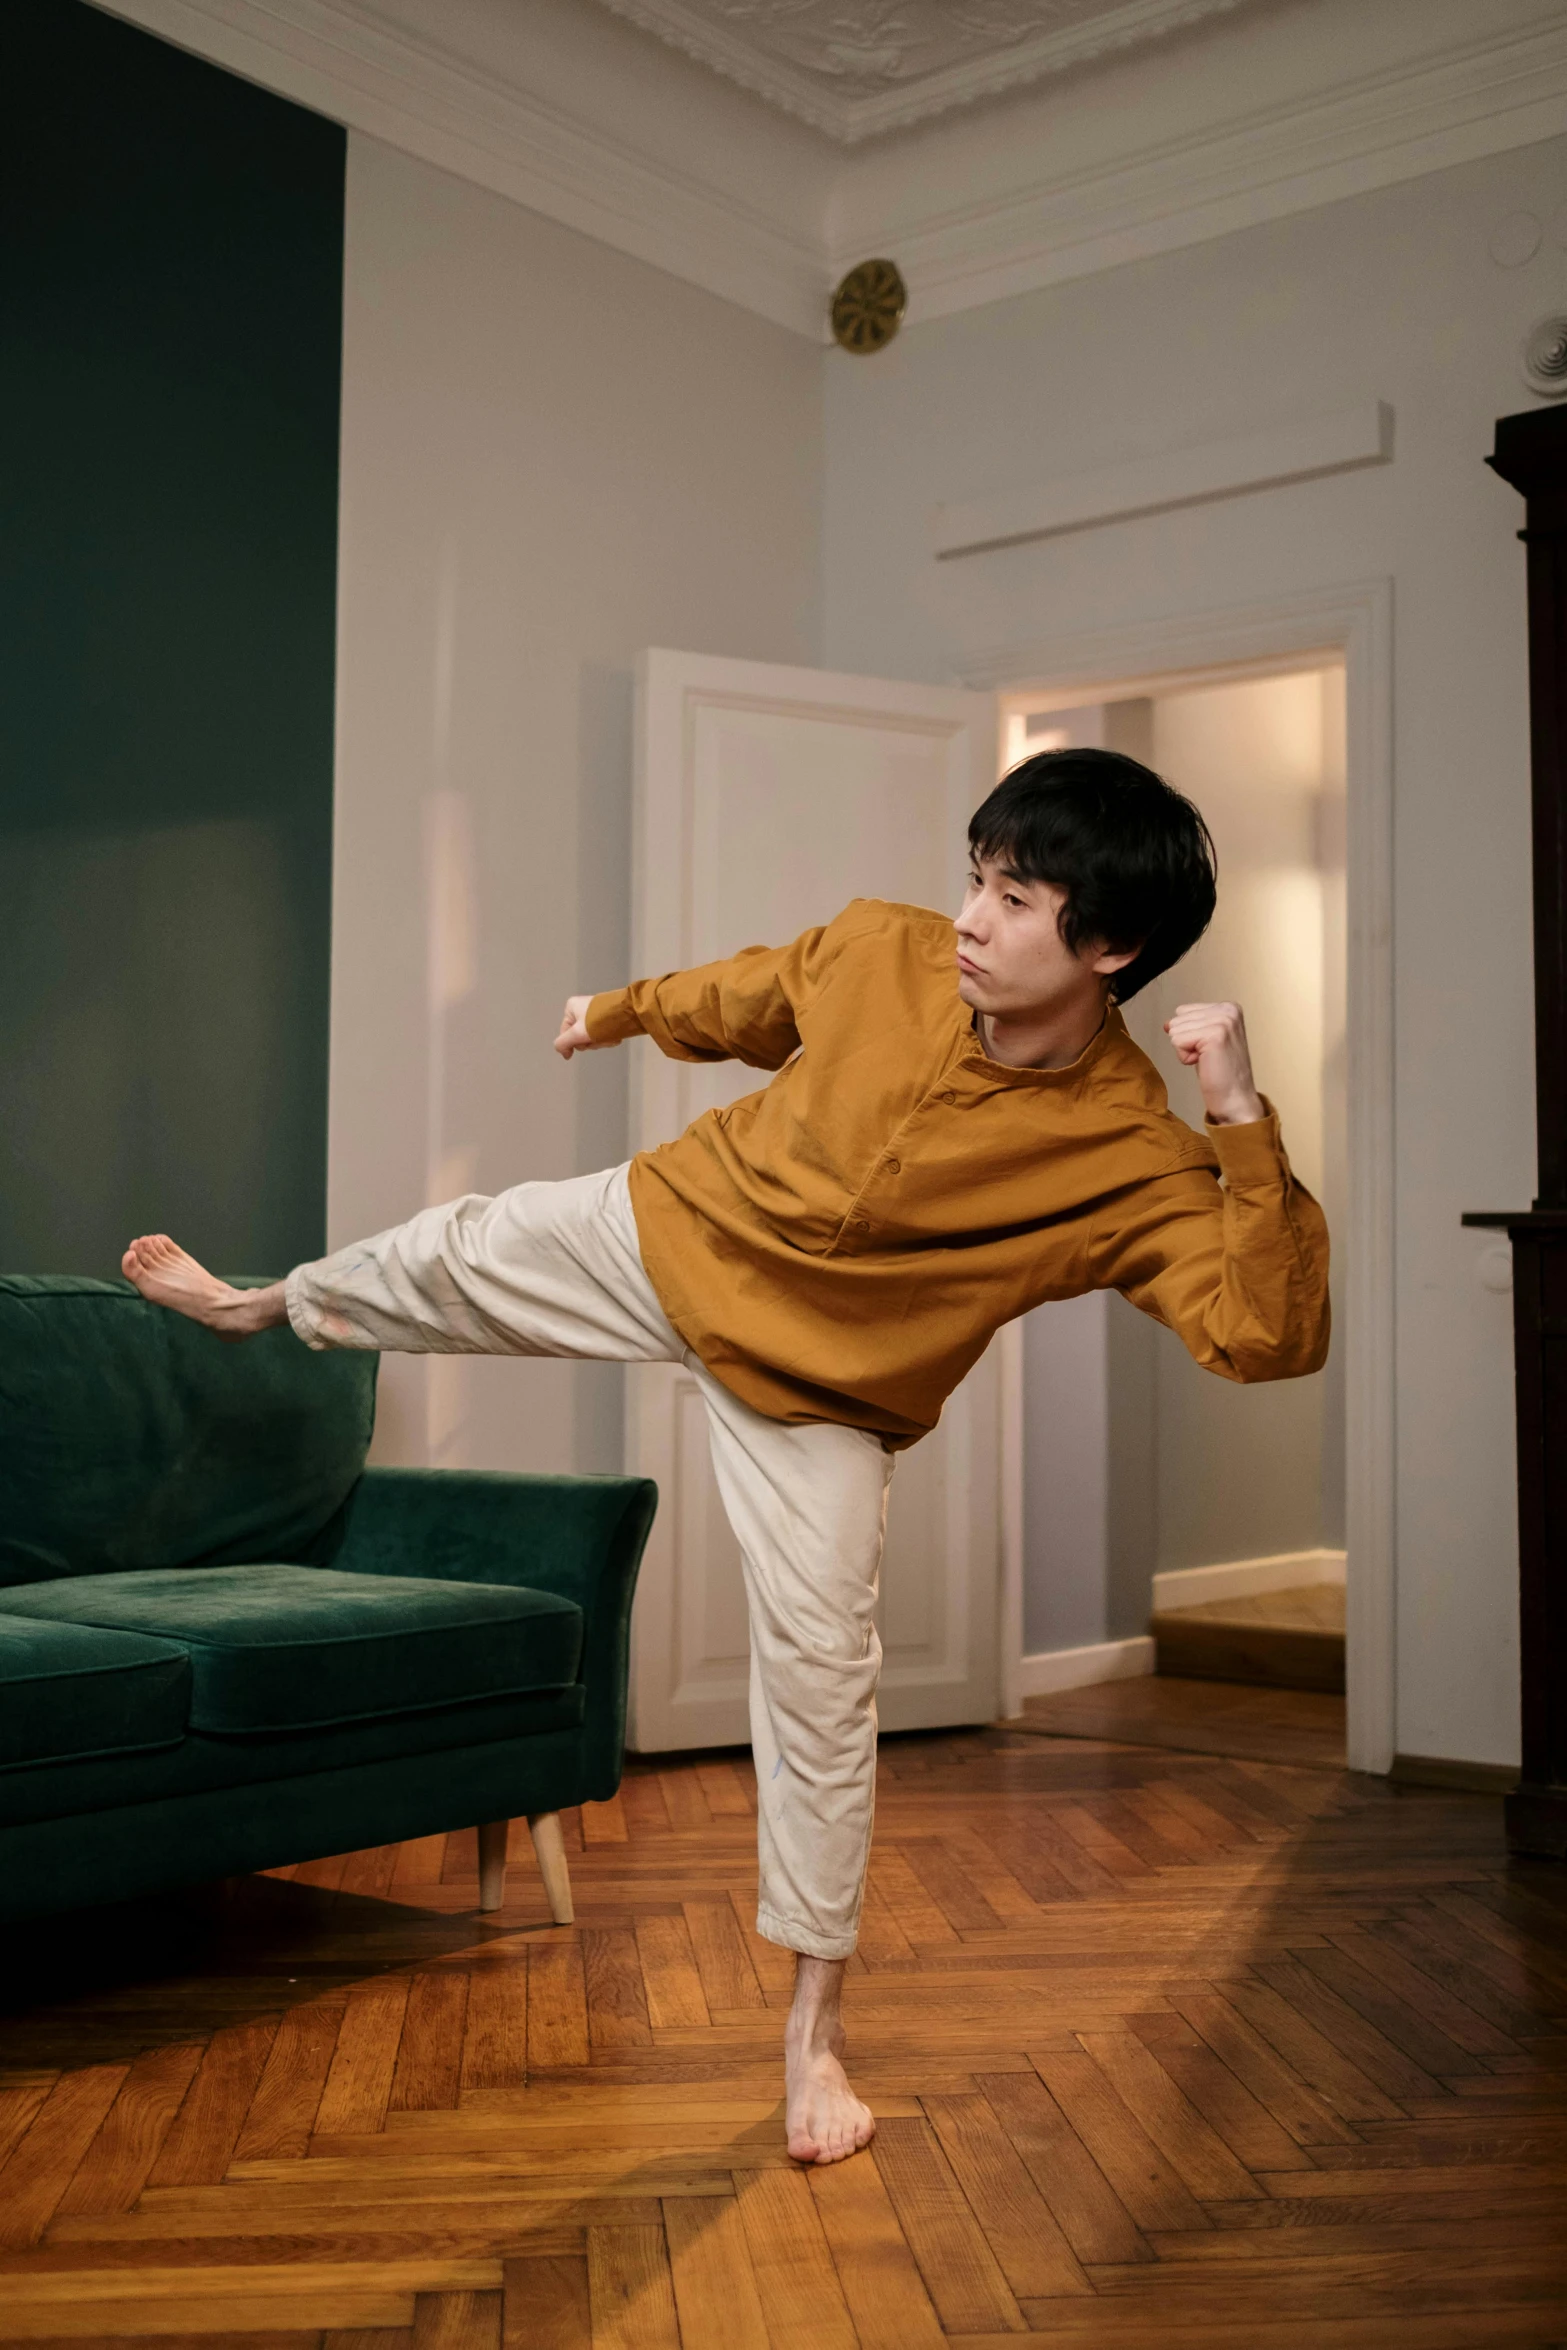 a man standing on one leg in a living room, an album cover, inspired by Fei Danxu, pexels contest winner, arabesque, karate pose, young boy, ( ( theatrical ) ), ignant